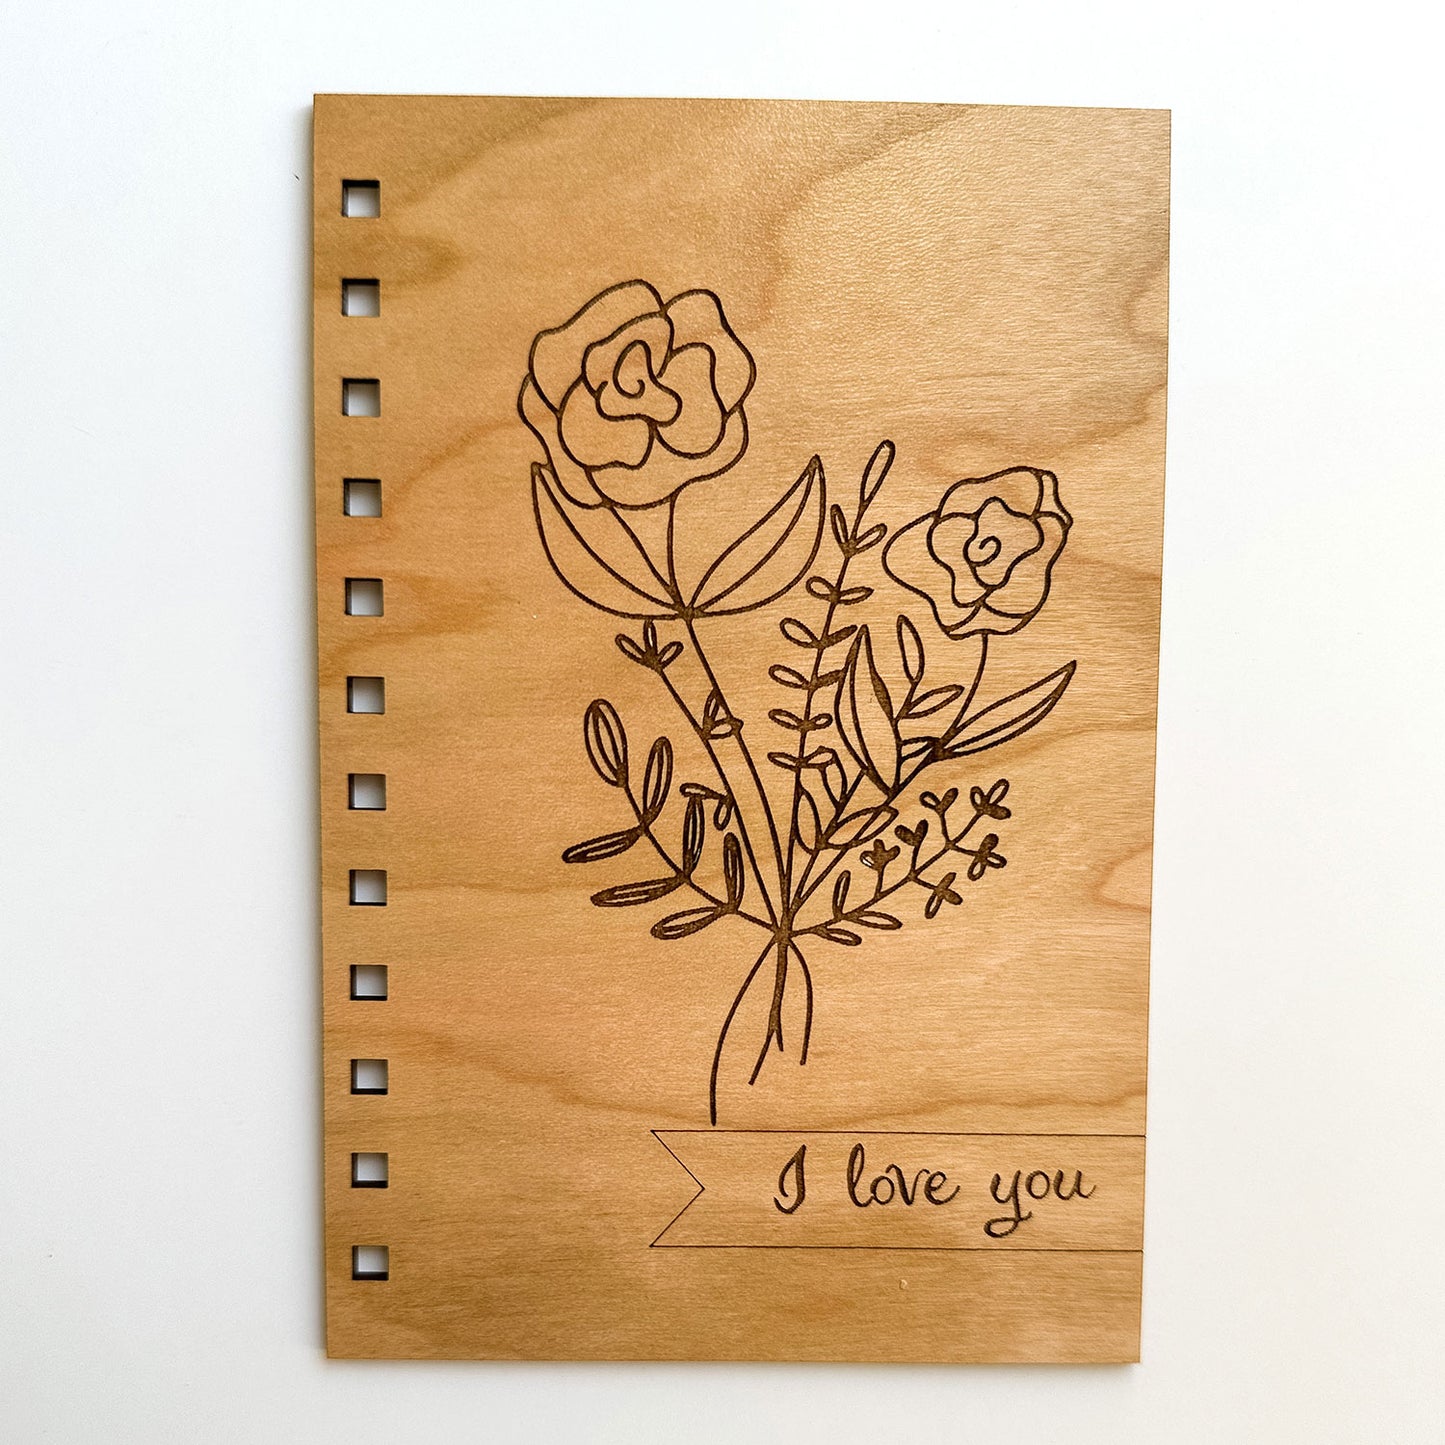 Flower Bouquet I Love You Photo Album Cover - Mother's Day Gift